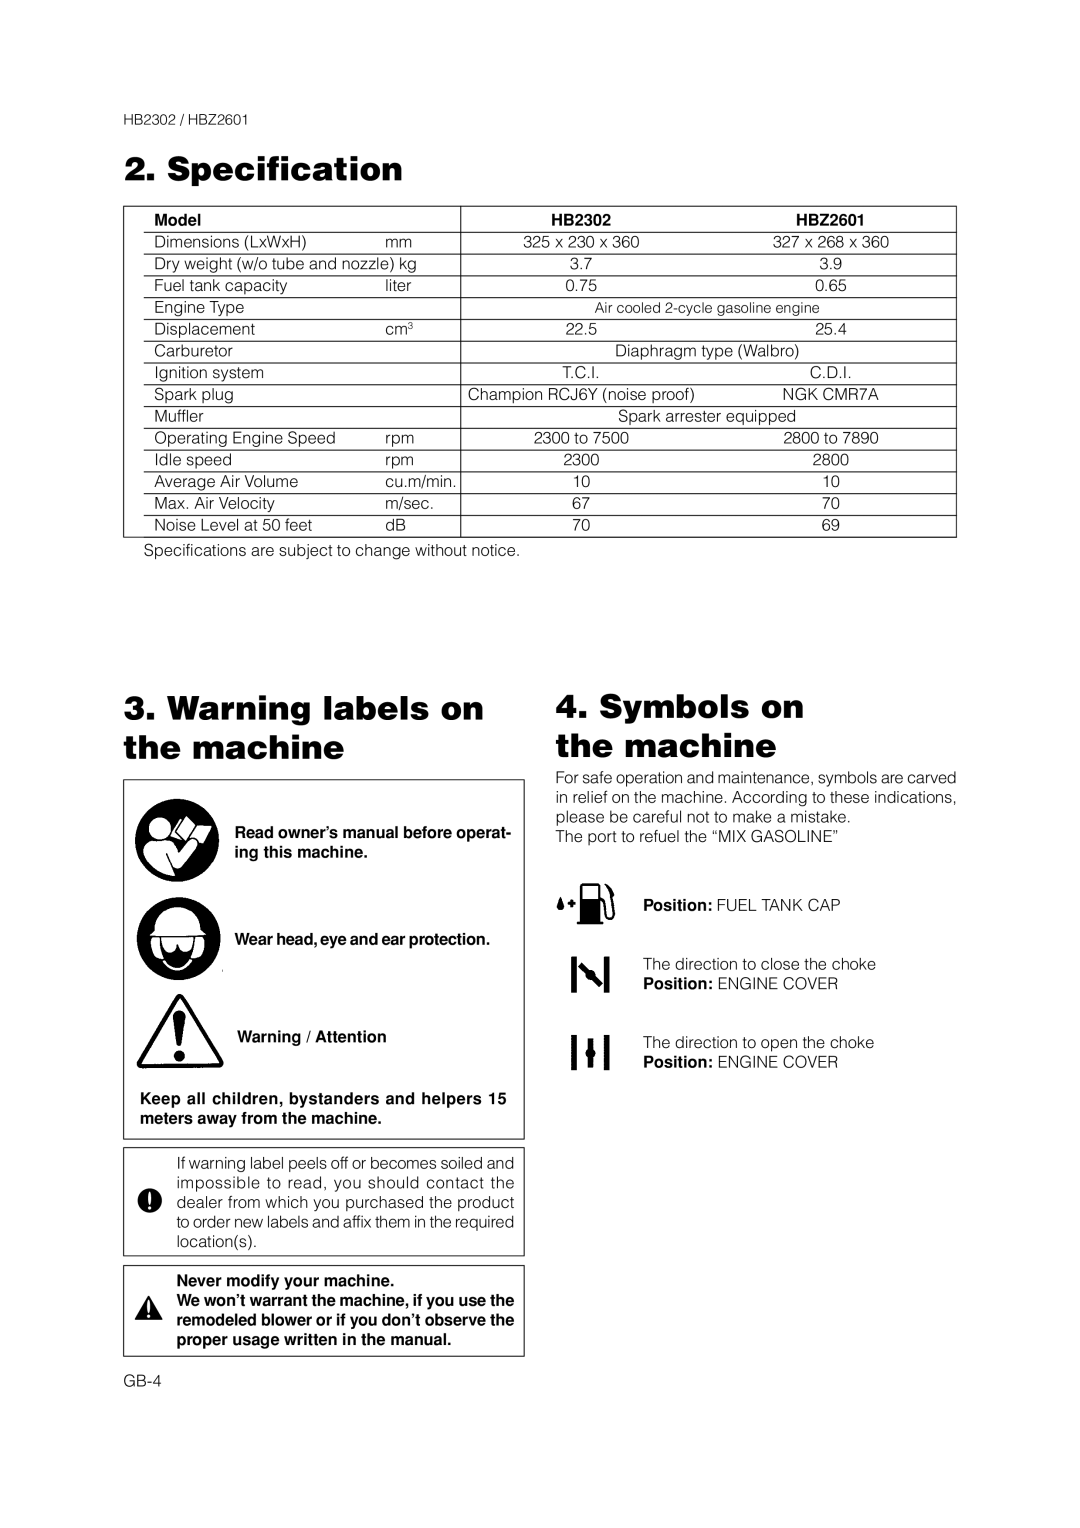 Zenoah HBZ2601 Specification, Warning labels on the machine, Symbols on the machine, Model, HB2302, Warning / Attention 